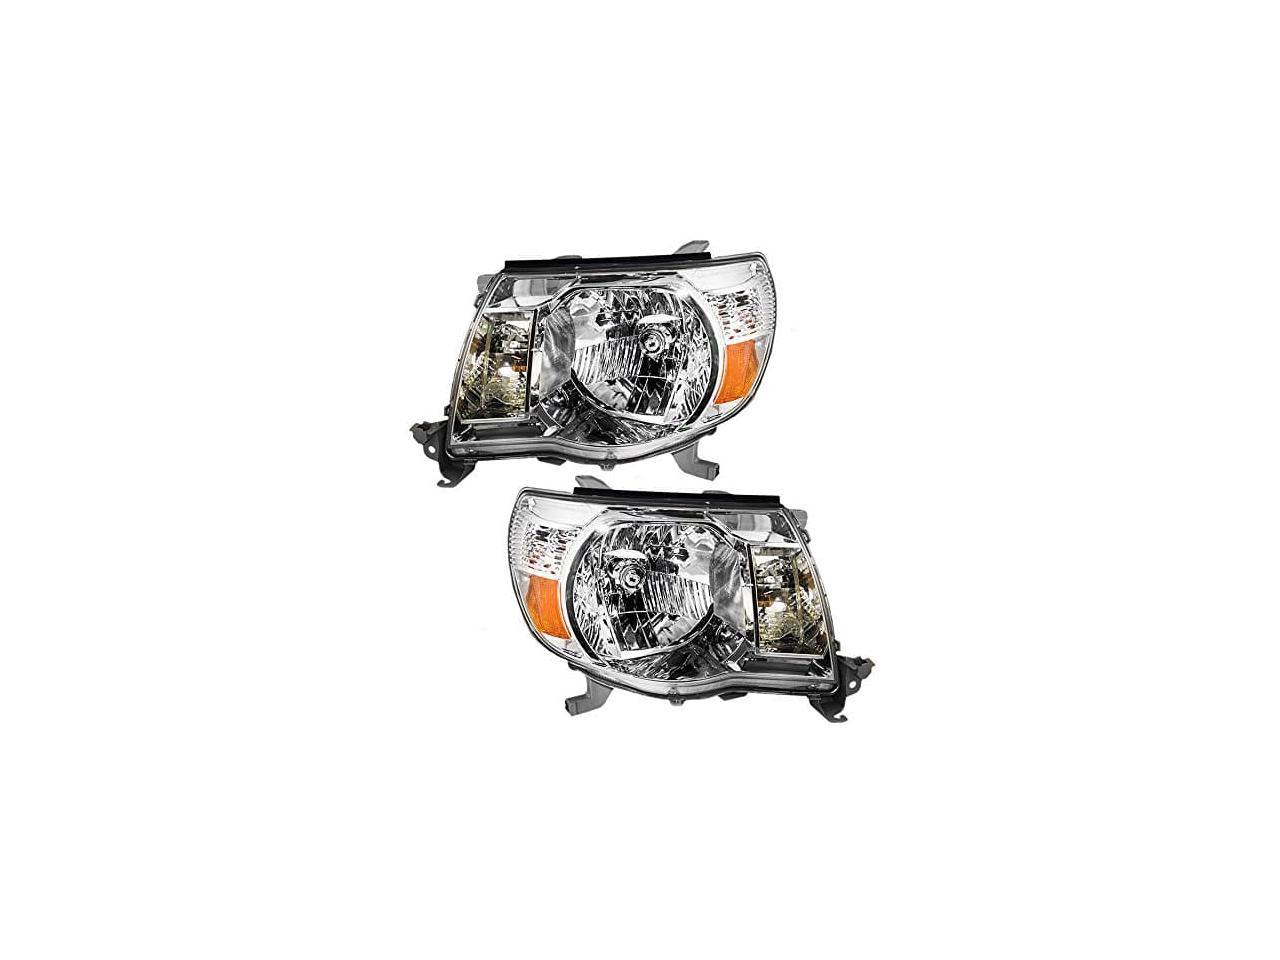 Driver and Passenger Headlights Headlamps with Bright Chrome Bezels Replacement for 2005-2011 Tacoma 8115004163 8111004163 